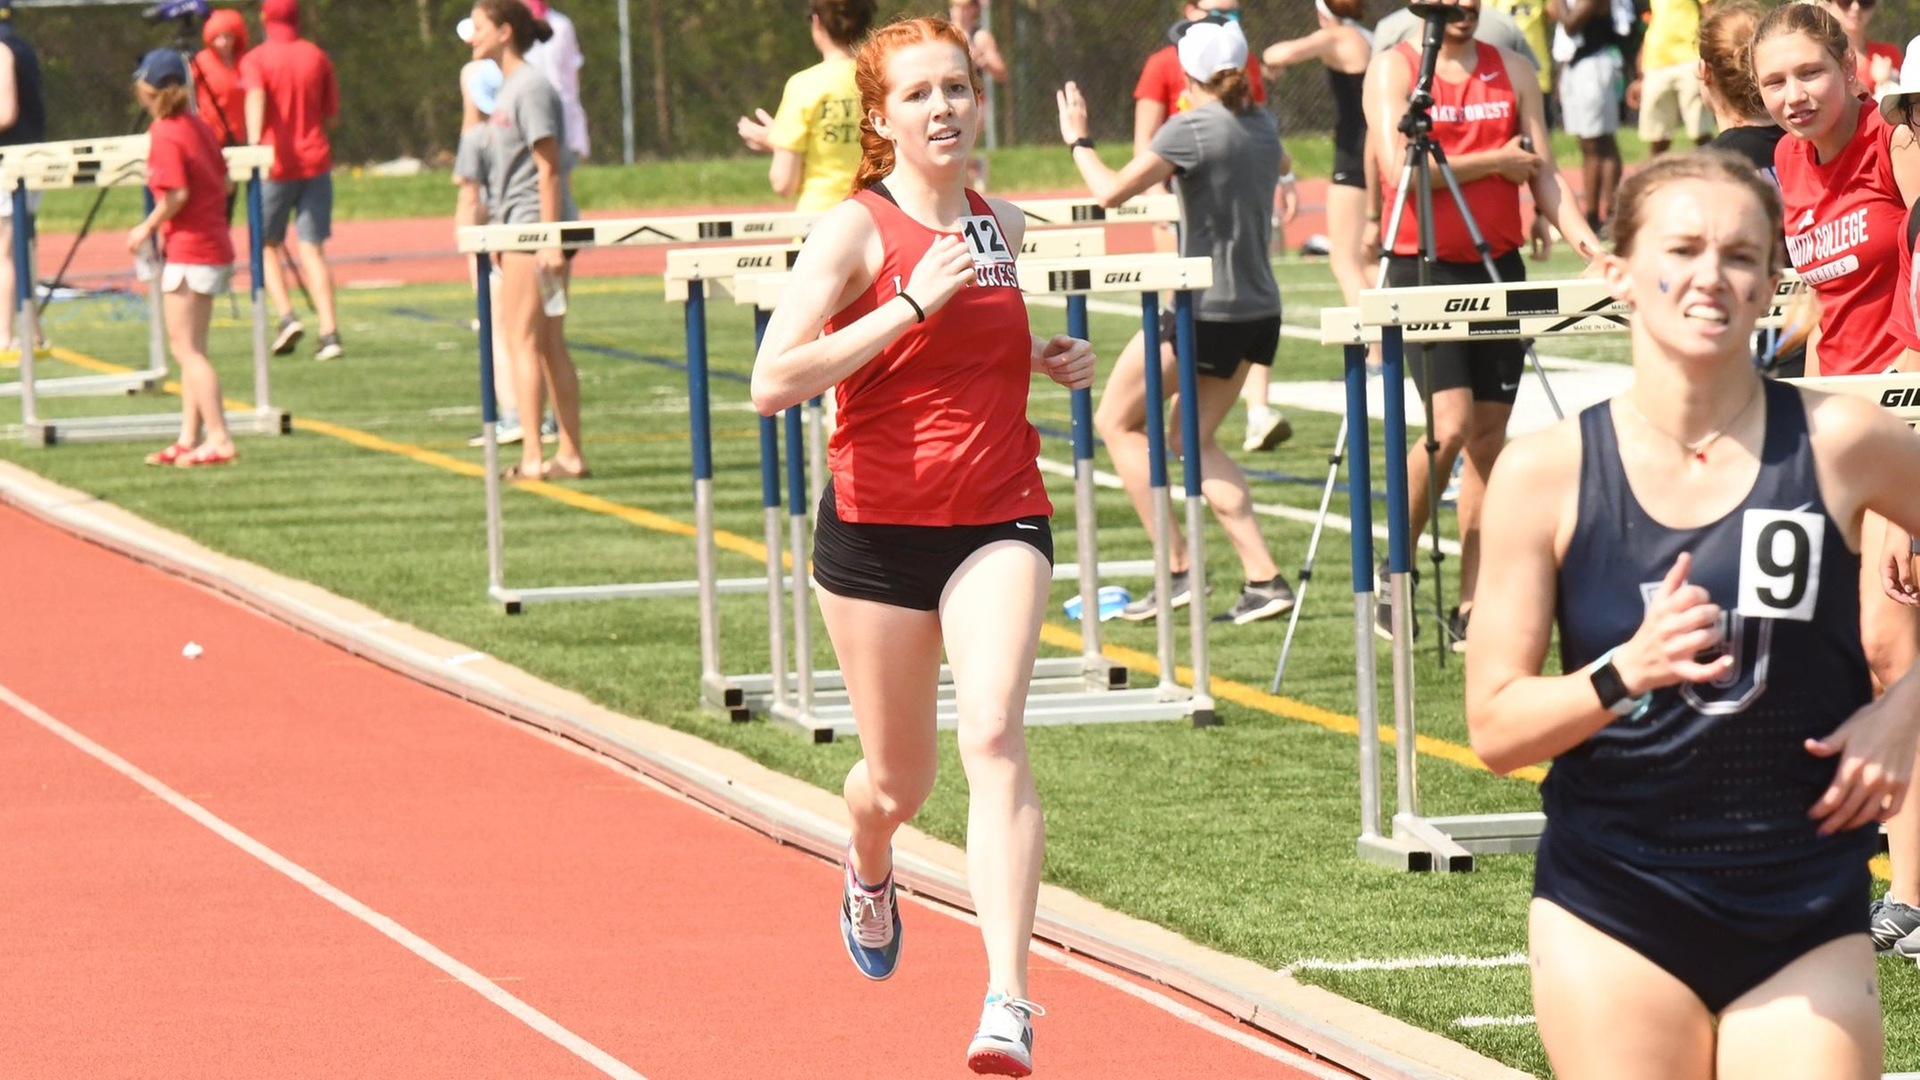 Morland the 1500 Runner-Up on Day One of MWC Championships